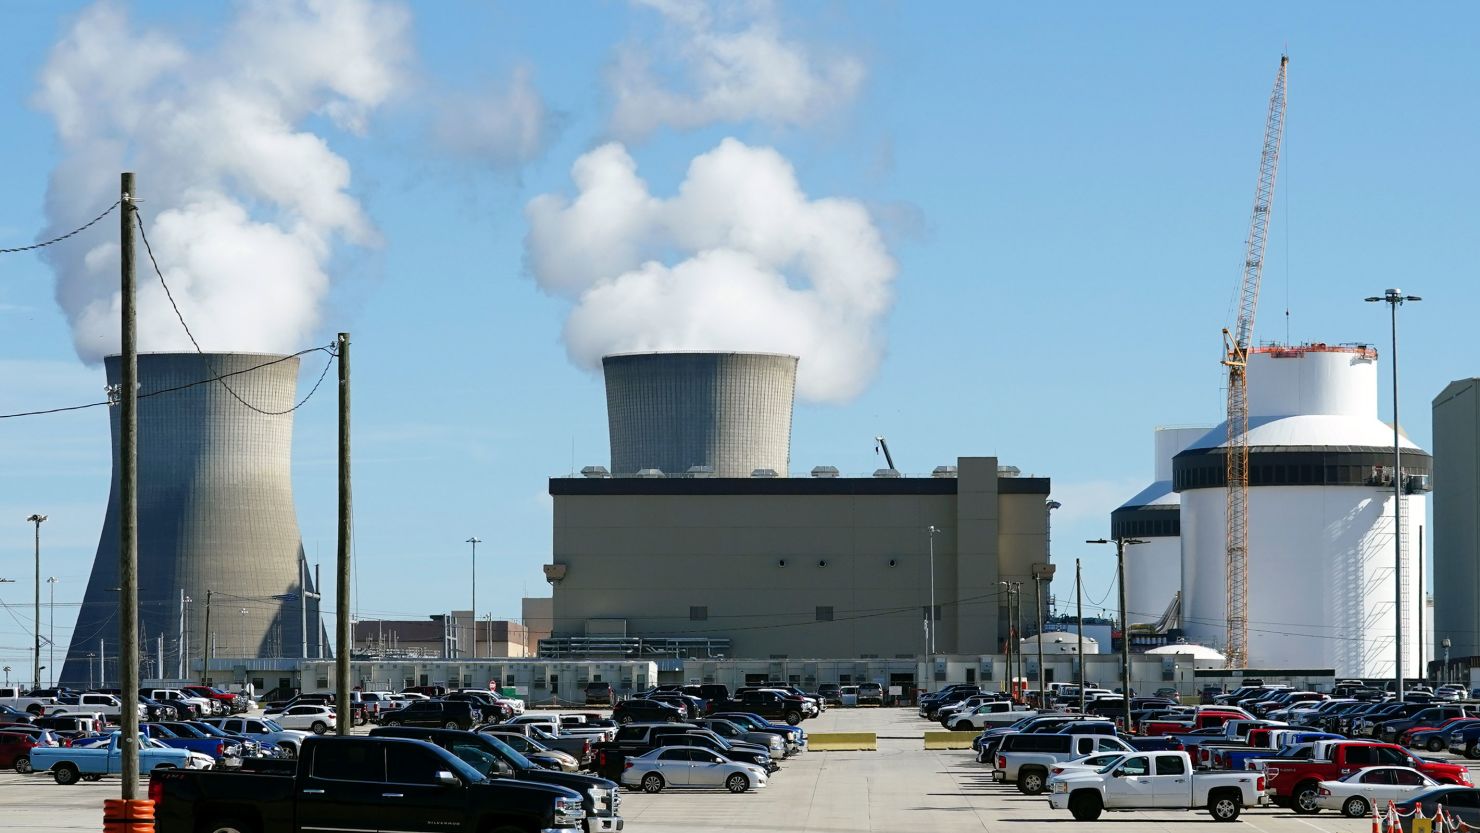 Reactors for Unit 3 and 4 sit at Georgia Power's Plant Vogtle nuclear power plant in January 2023 in Waynesboro, Georgia.